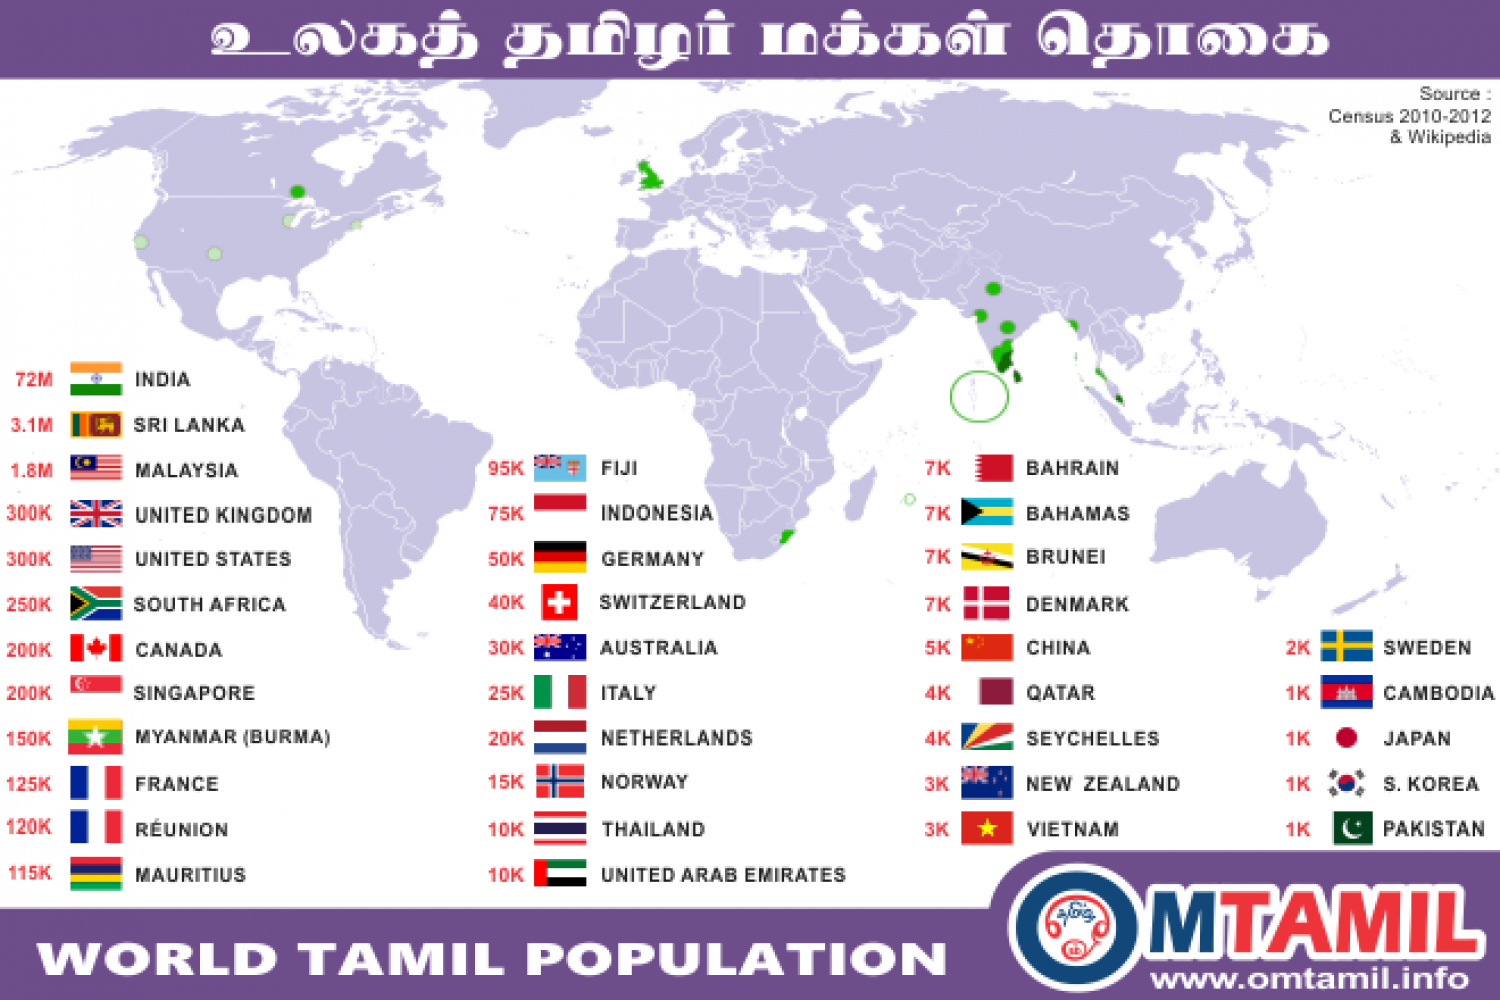 A map of the world, depicting the countiries in which Tamil is spoken.